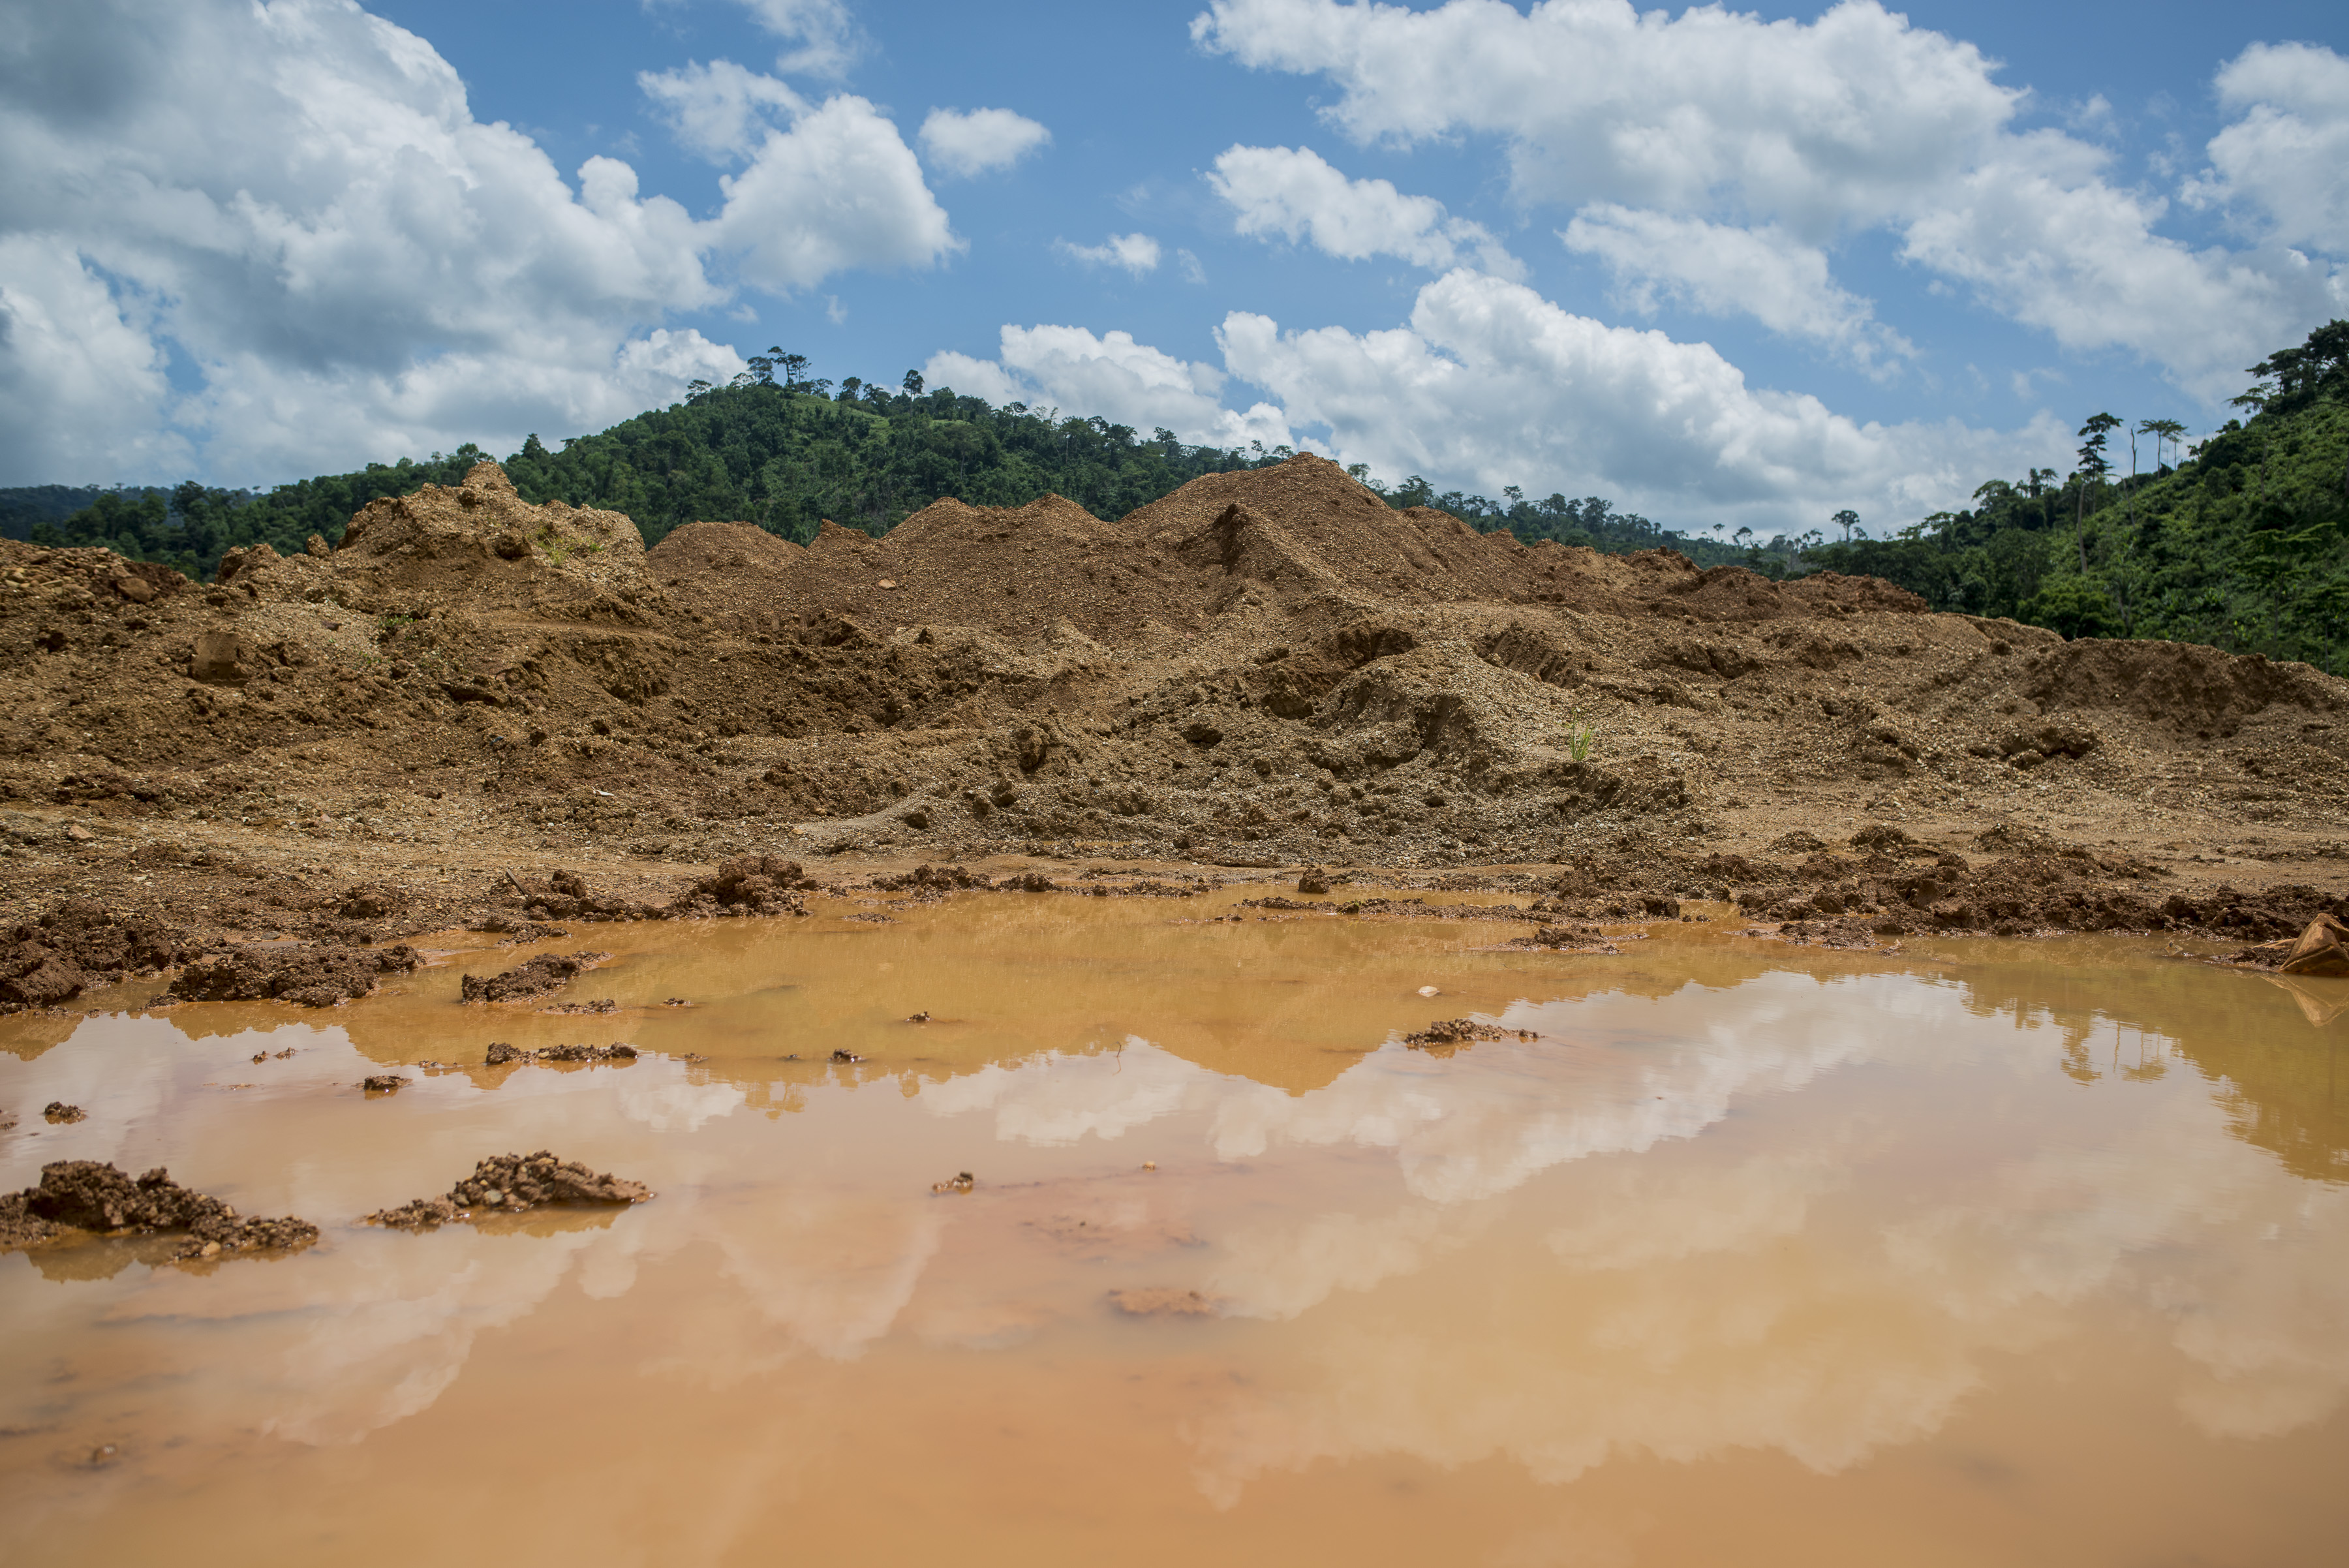 A degraded mining legacy left after the excavation done in search of gold-containing ores.
